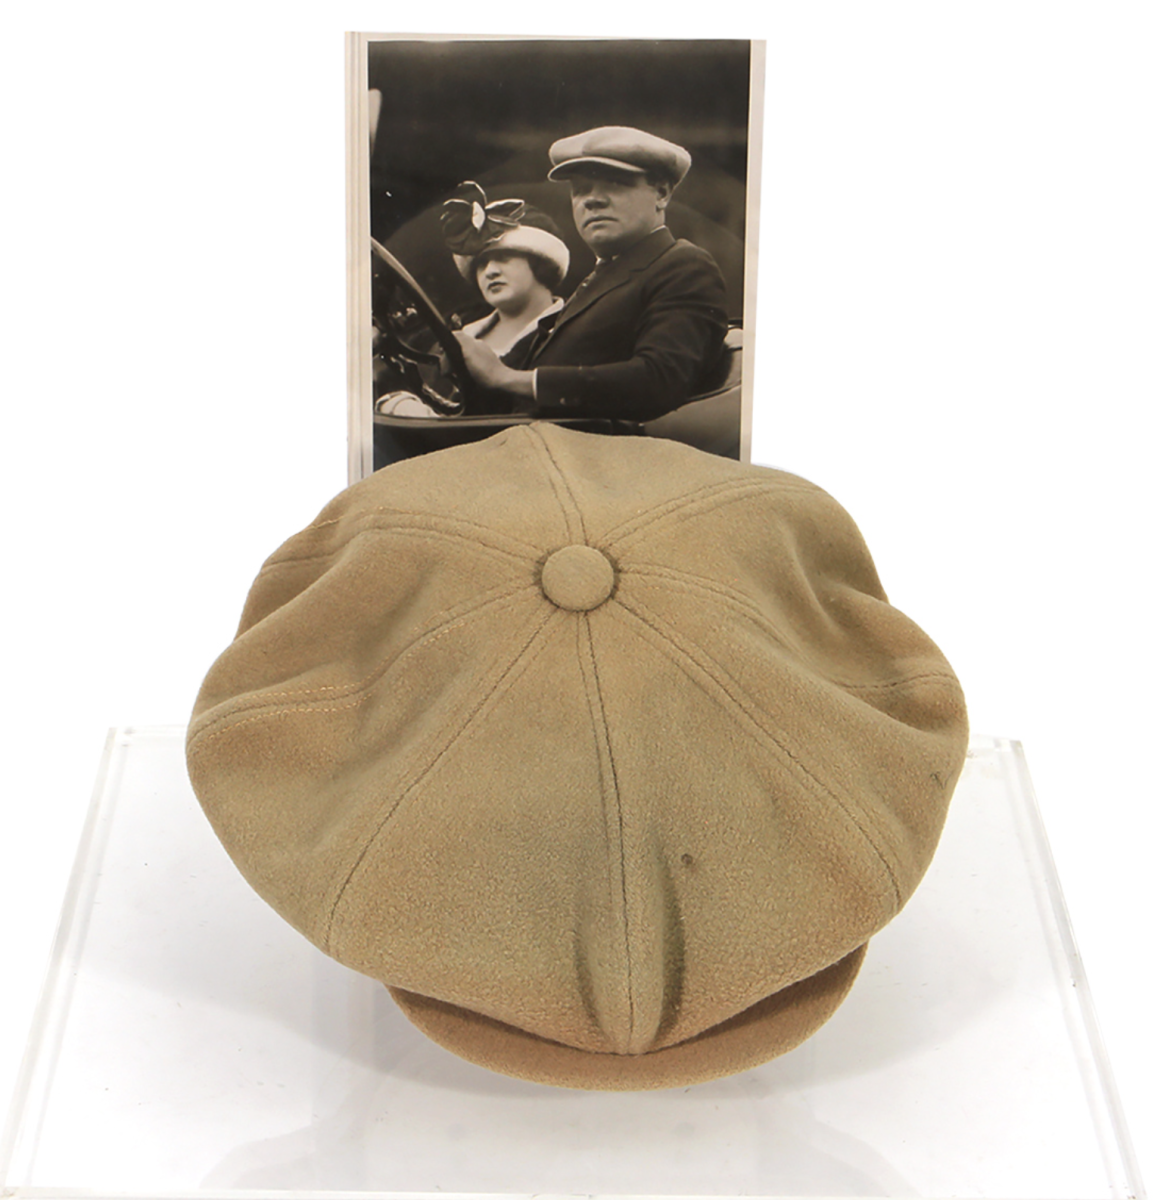 Babe Ruth cap that he wore during the 1920s.